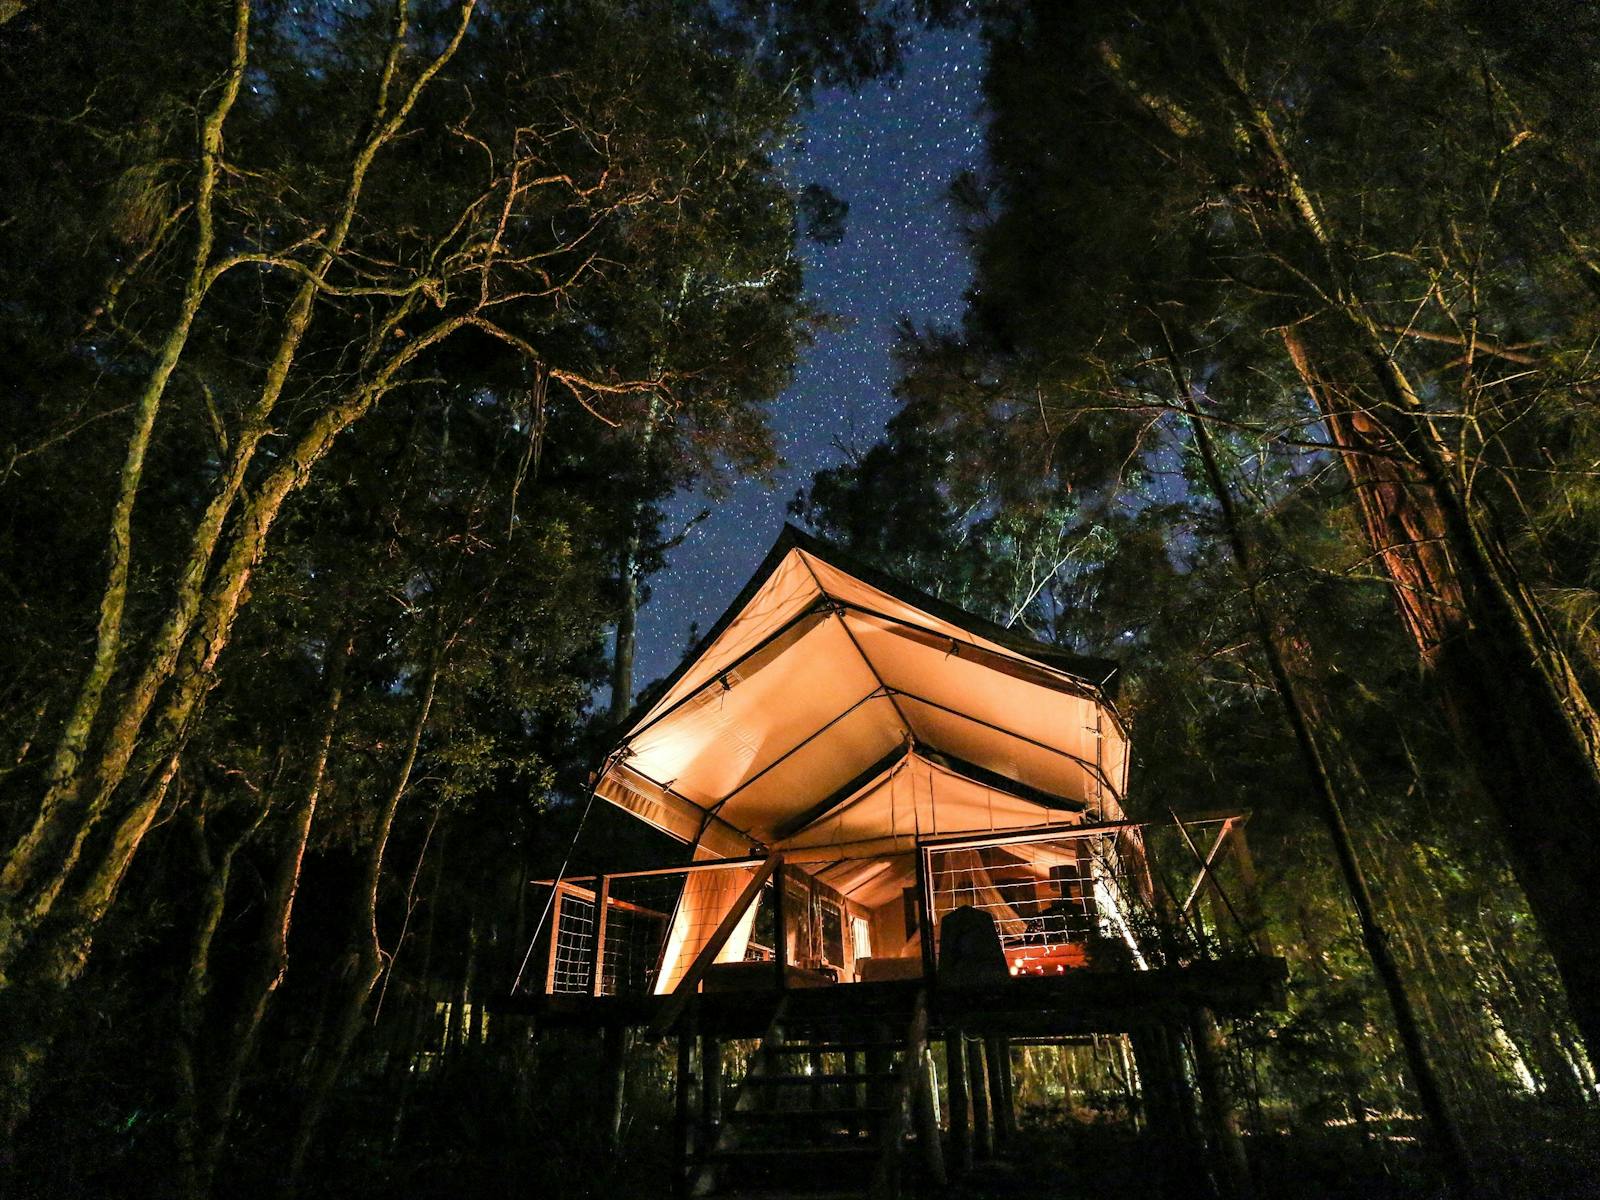 Under a starry sky at Paperbark Camp